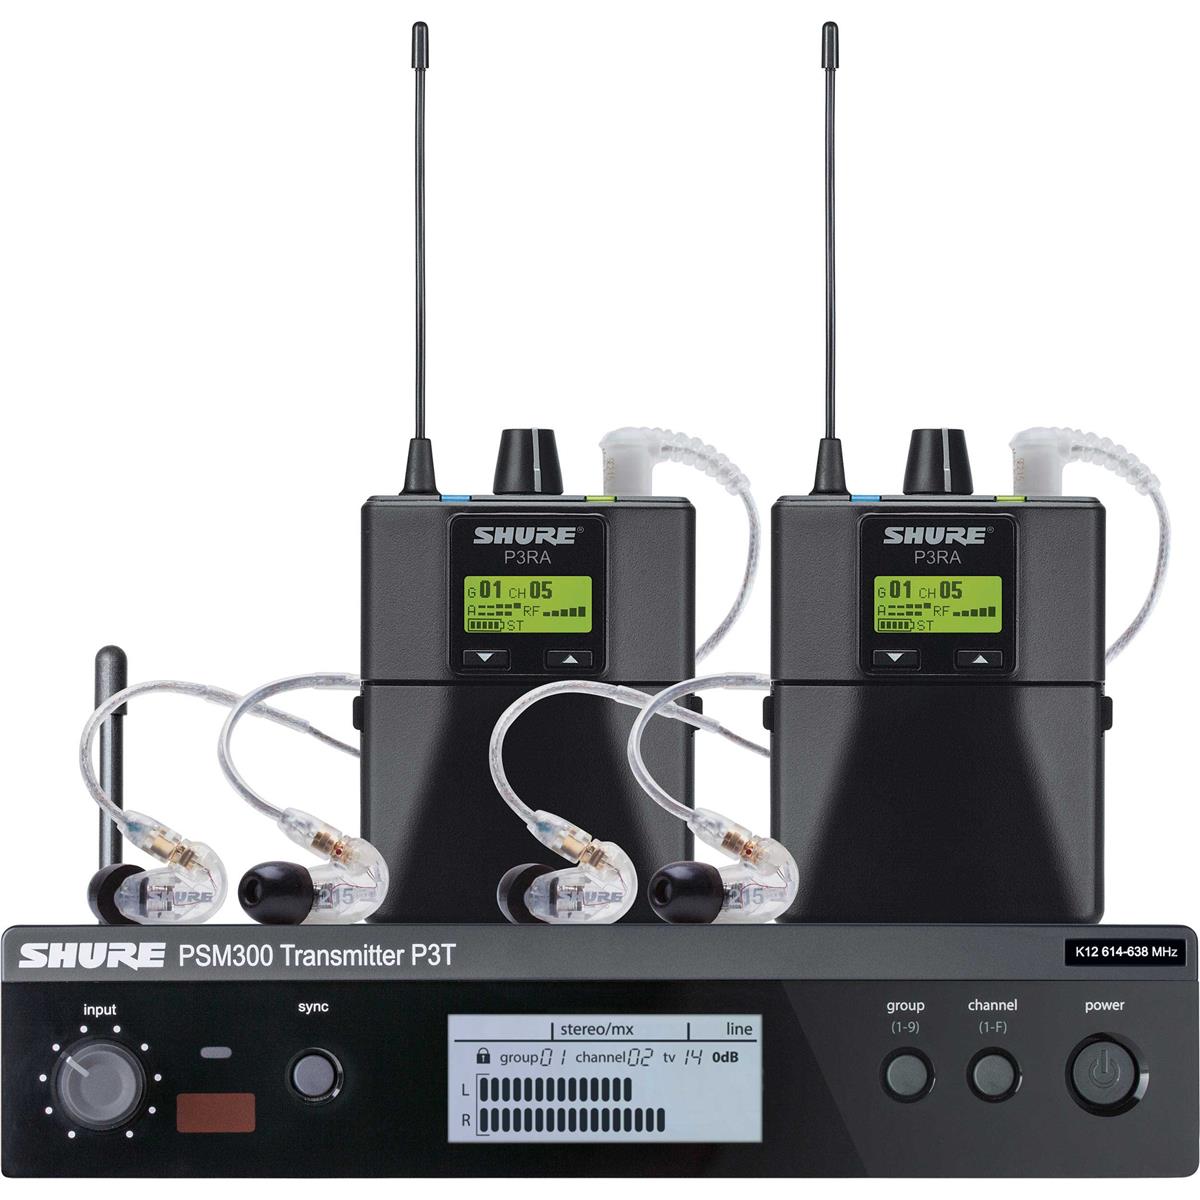 Shure PSM 300 Twin Pack Pro Wireless In-Ear Monitor Kit, H20: 518-542MHz, Black -  P3TRA215TWP-H20